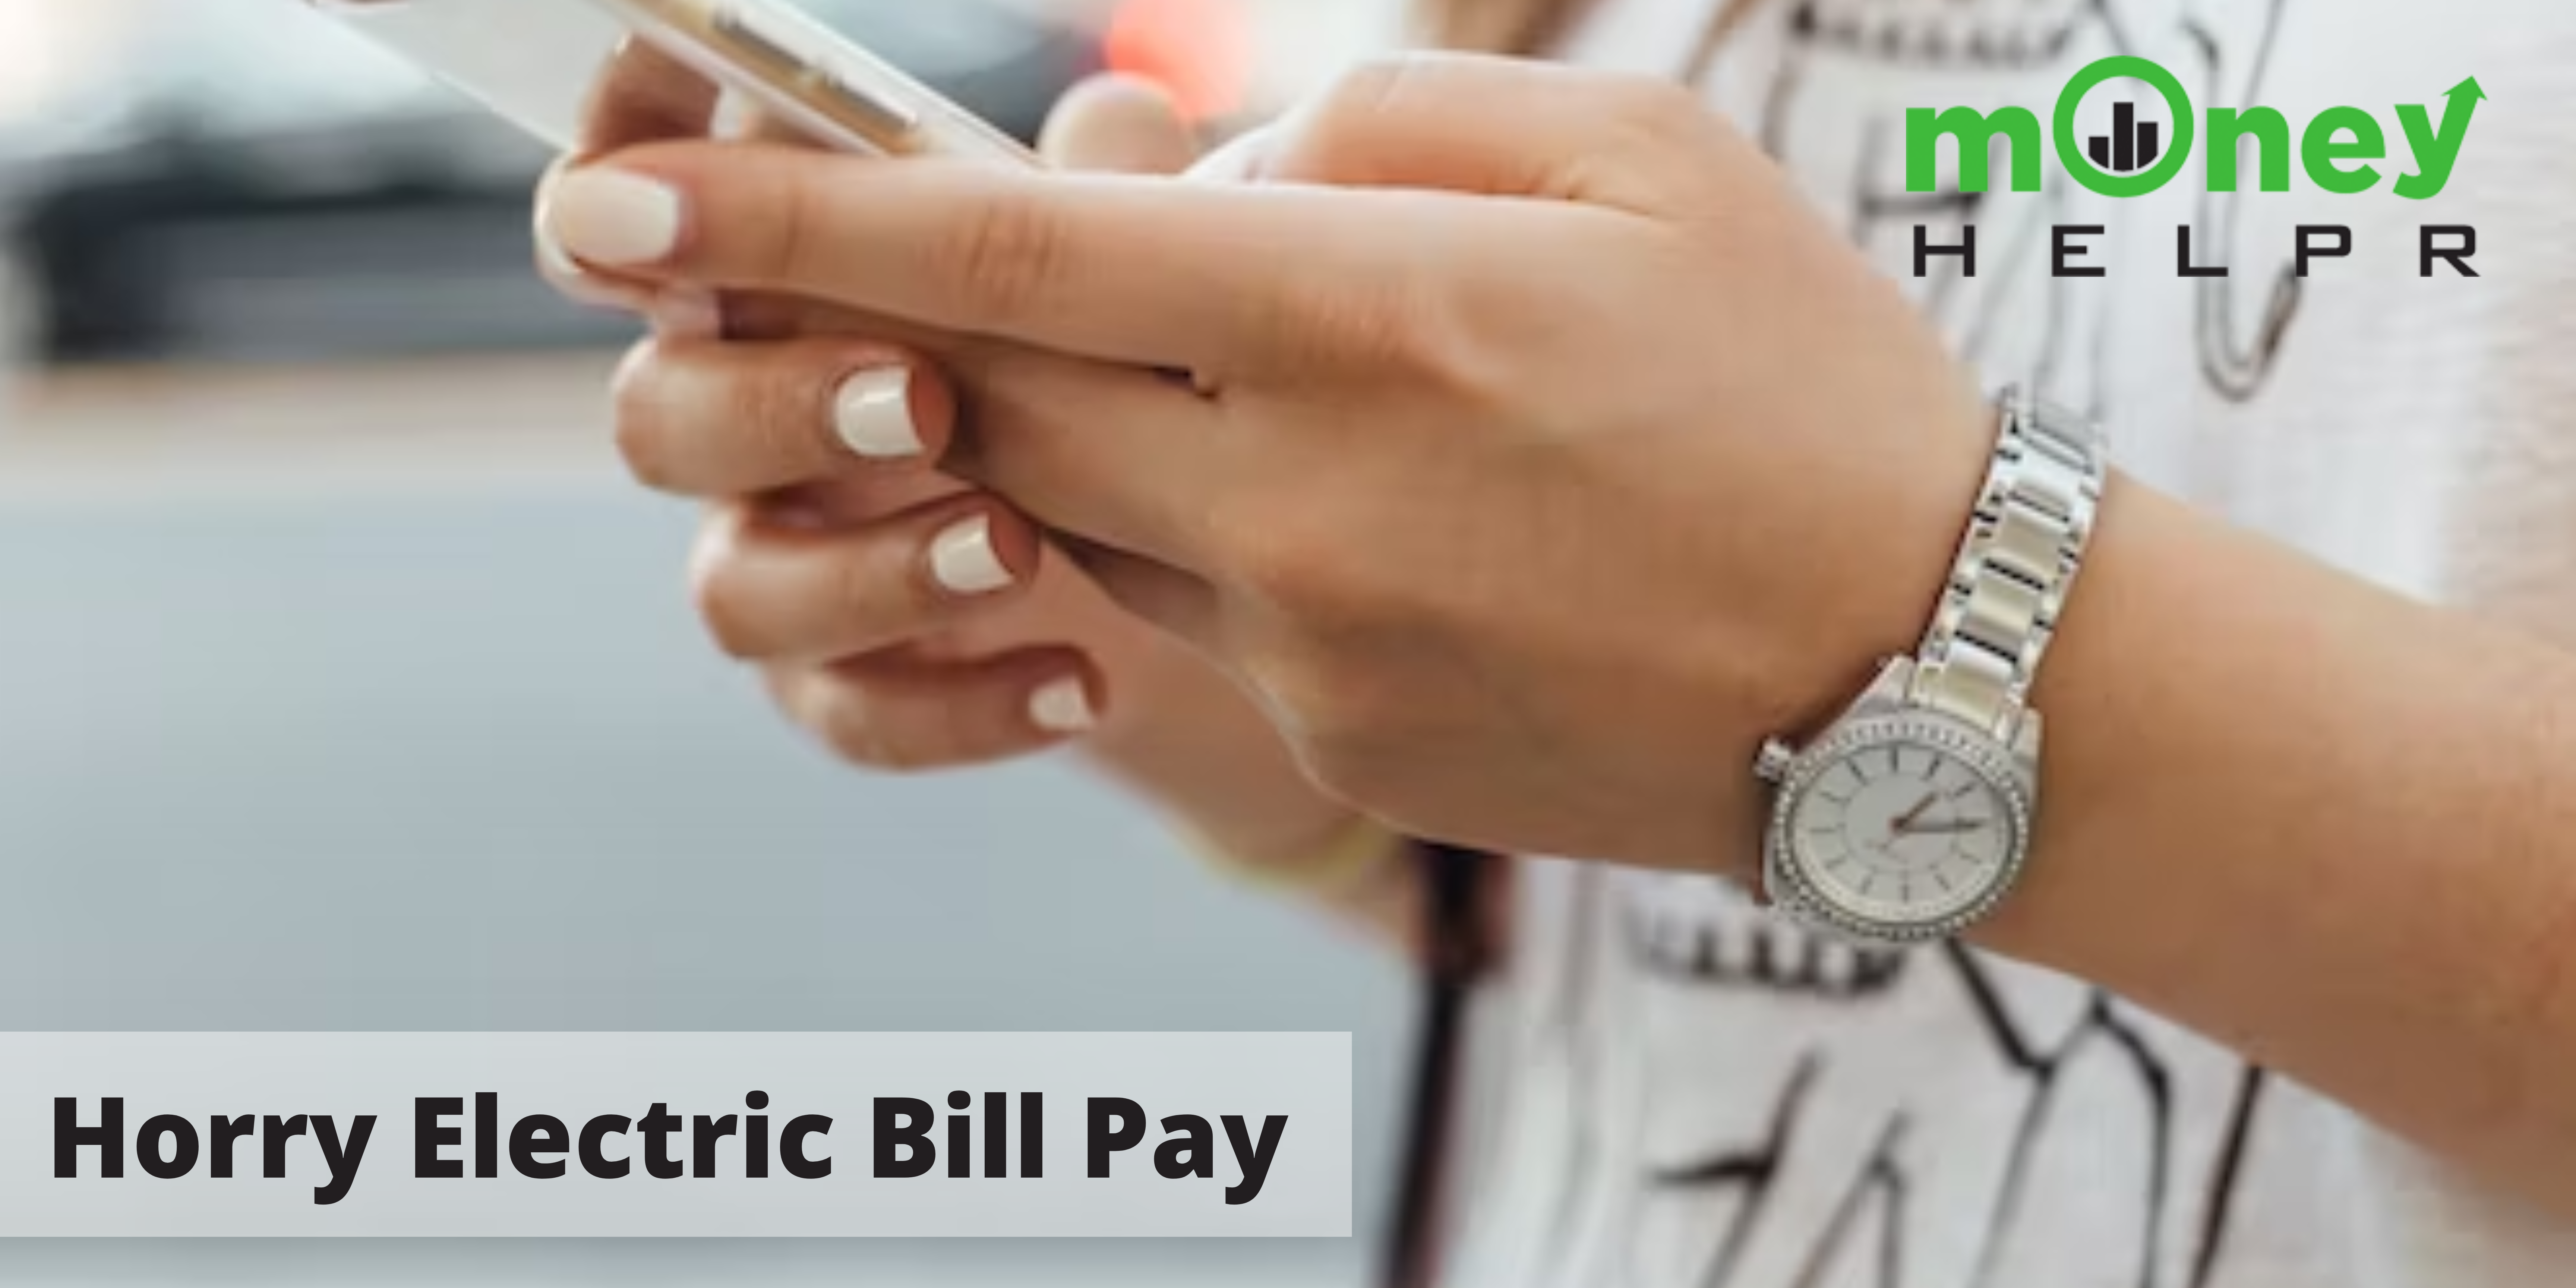 Horry electric bill pay